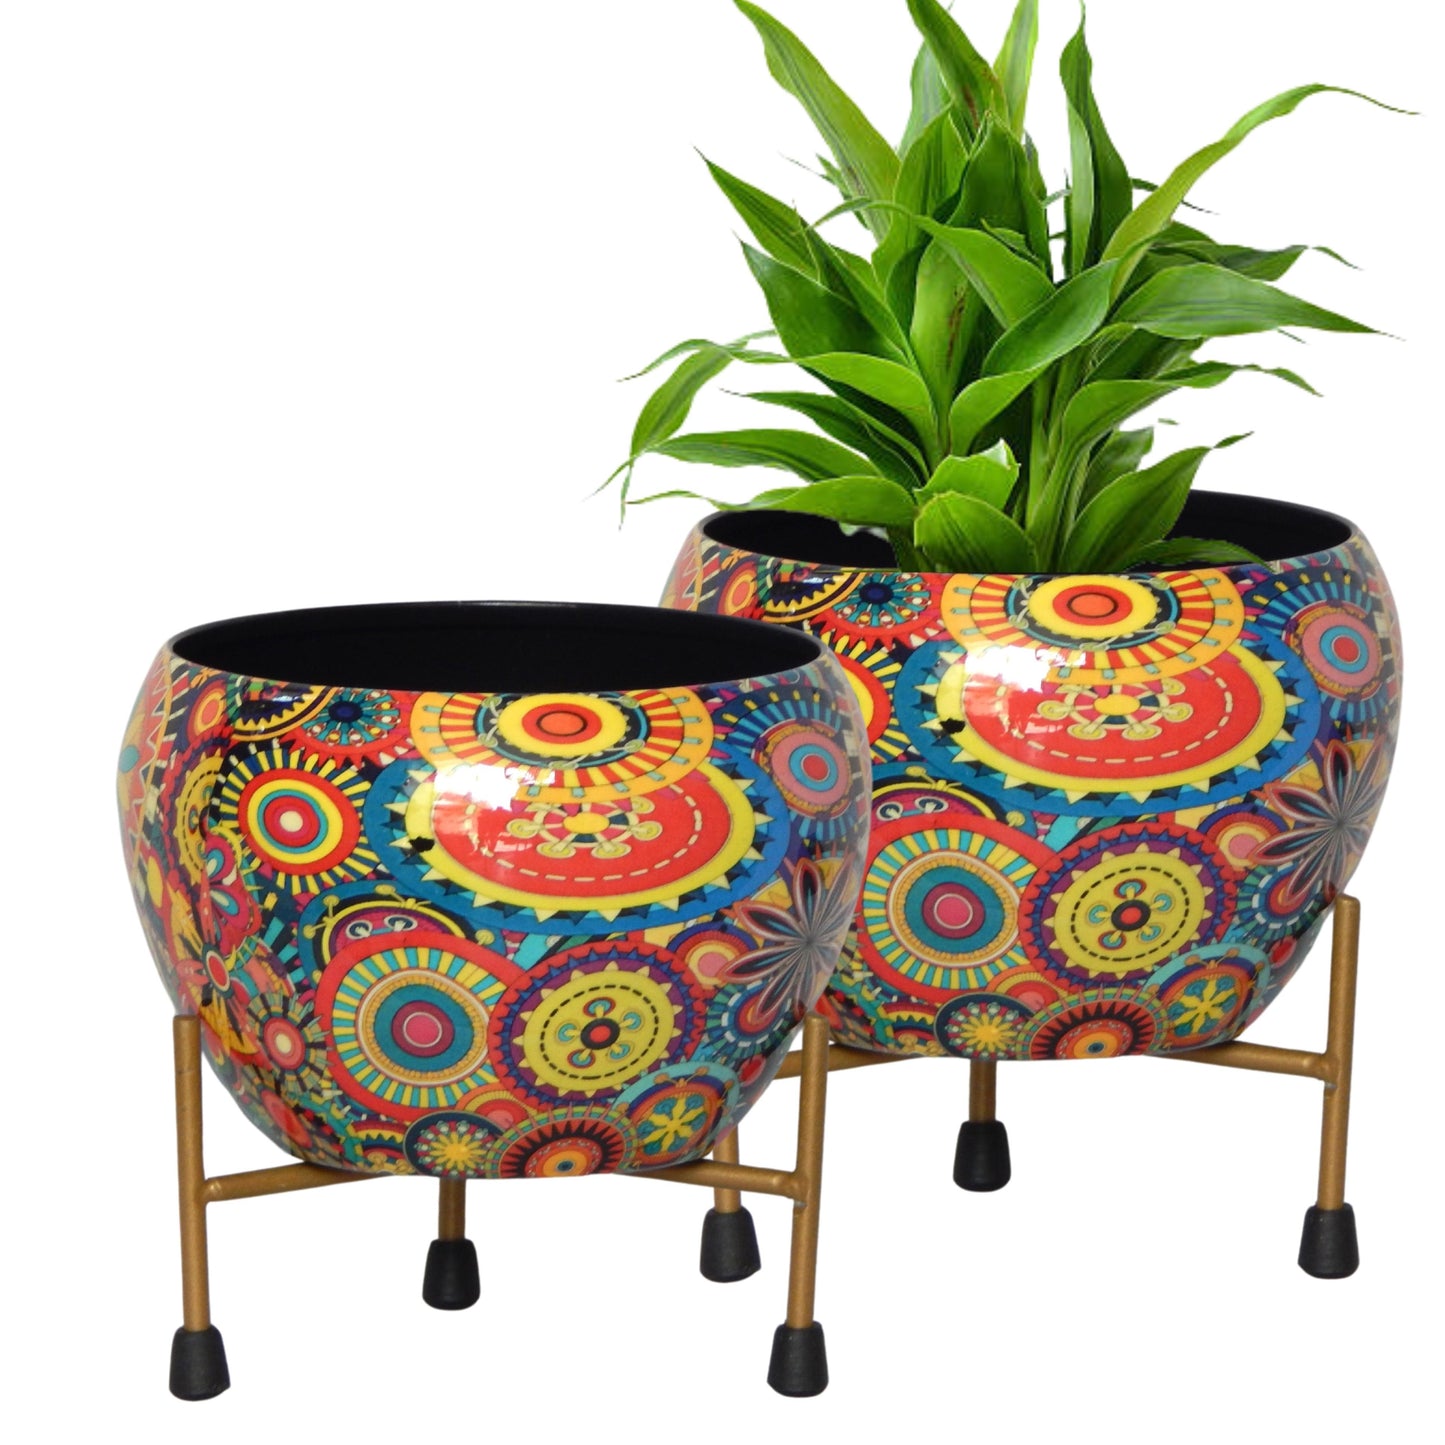 Lio Multicolor Metal Pot with Stand